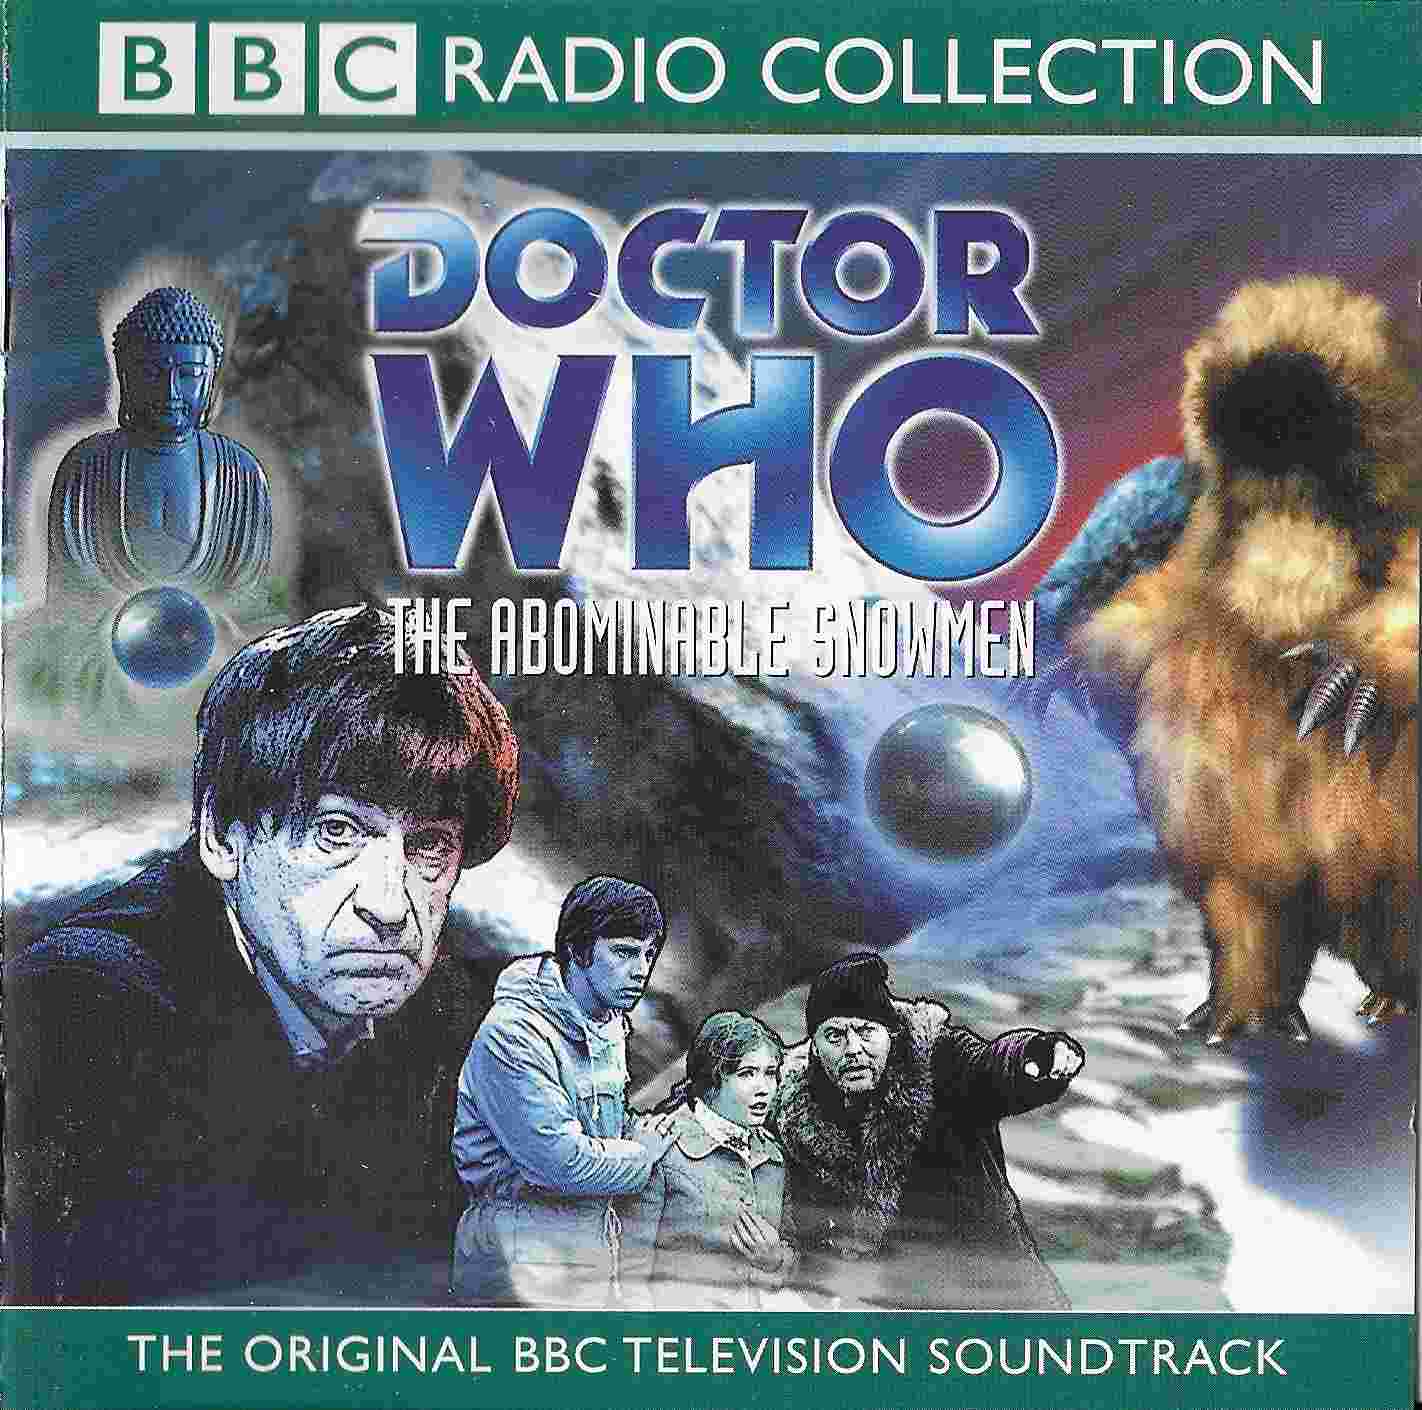 Picture of ISBN 0-563-47856-X Doctor Who - The abominable snowmen by artist Mervyn Haisman / Henry Lincoln from the BBC cds - Records and Tapes library